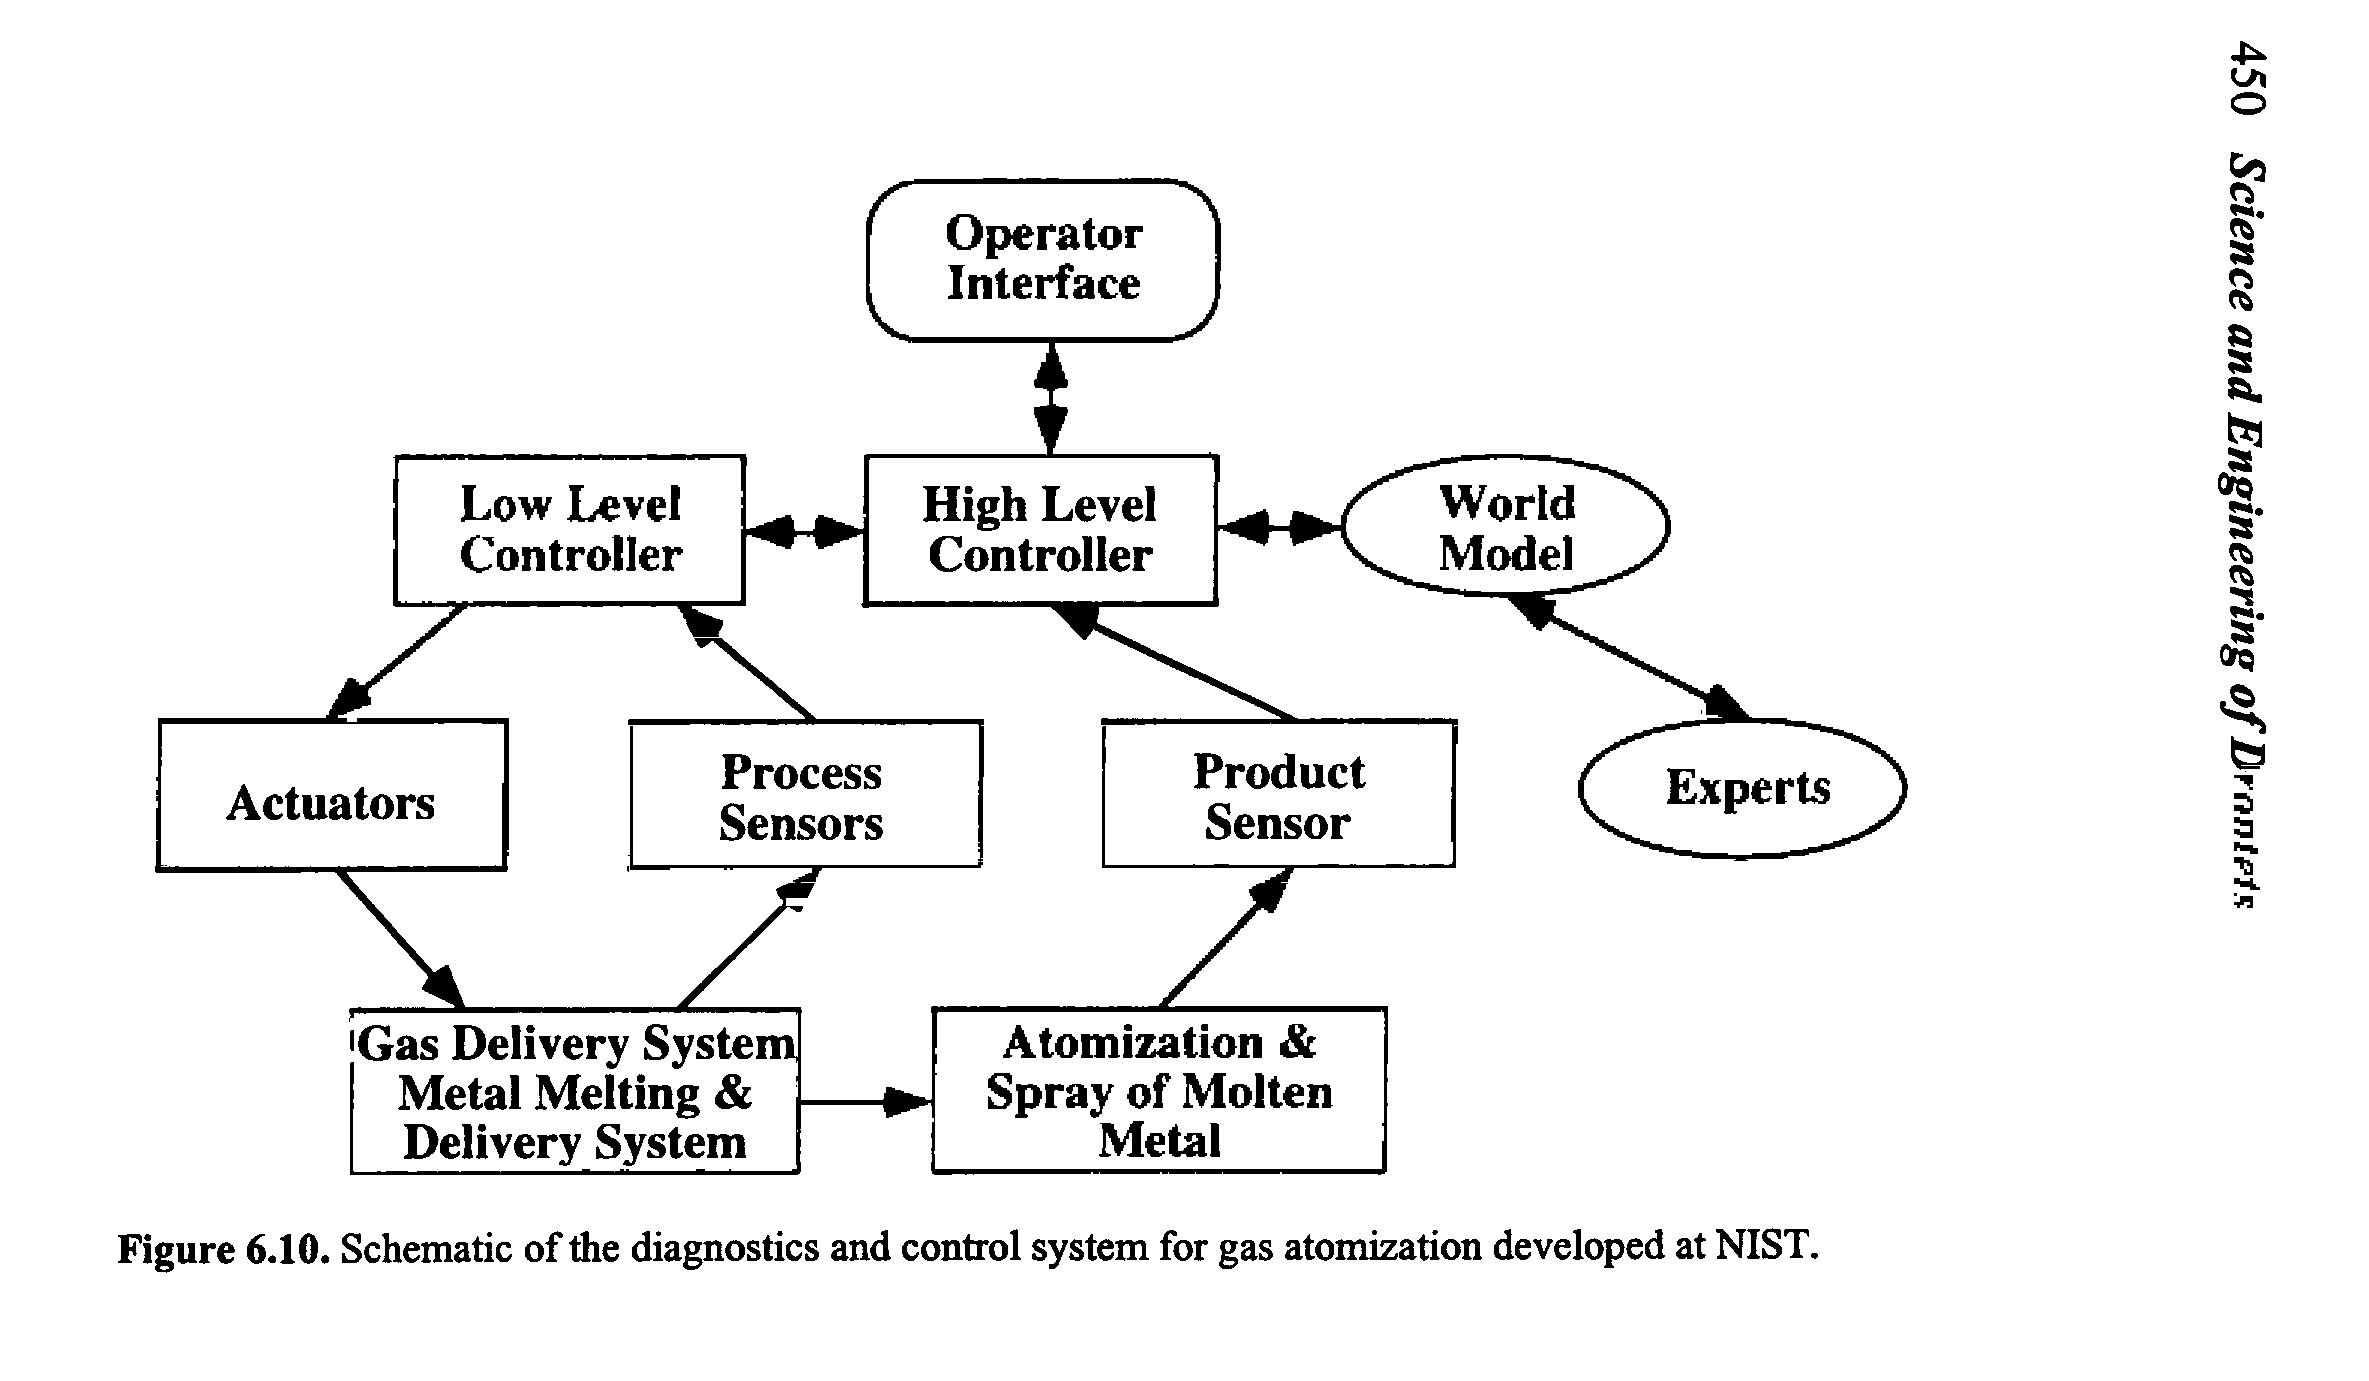 Figure 6.10. Schematic of the diagnostics and control system for gas atomization developed at NIST.